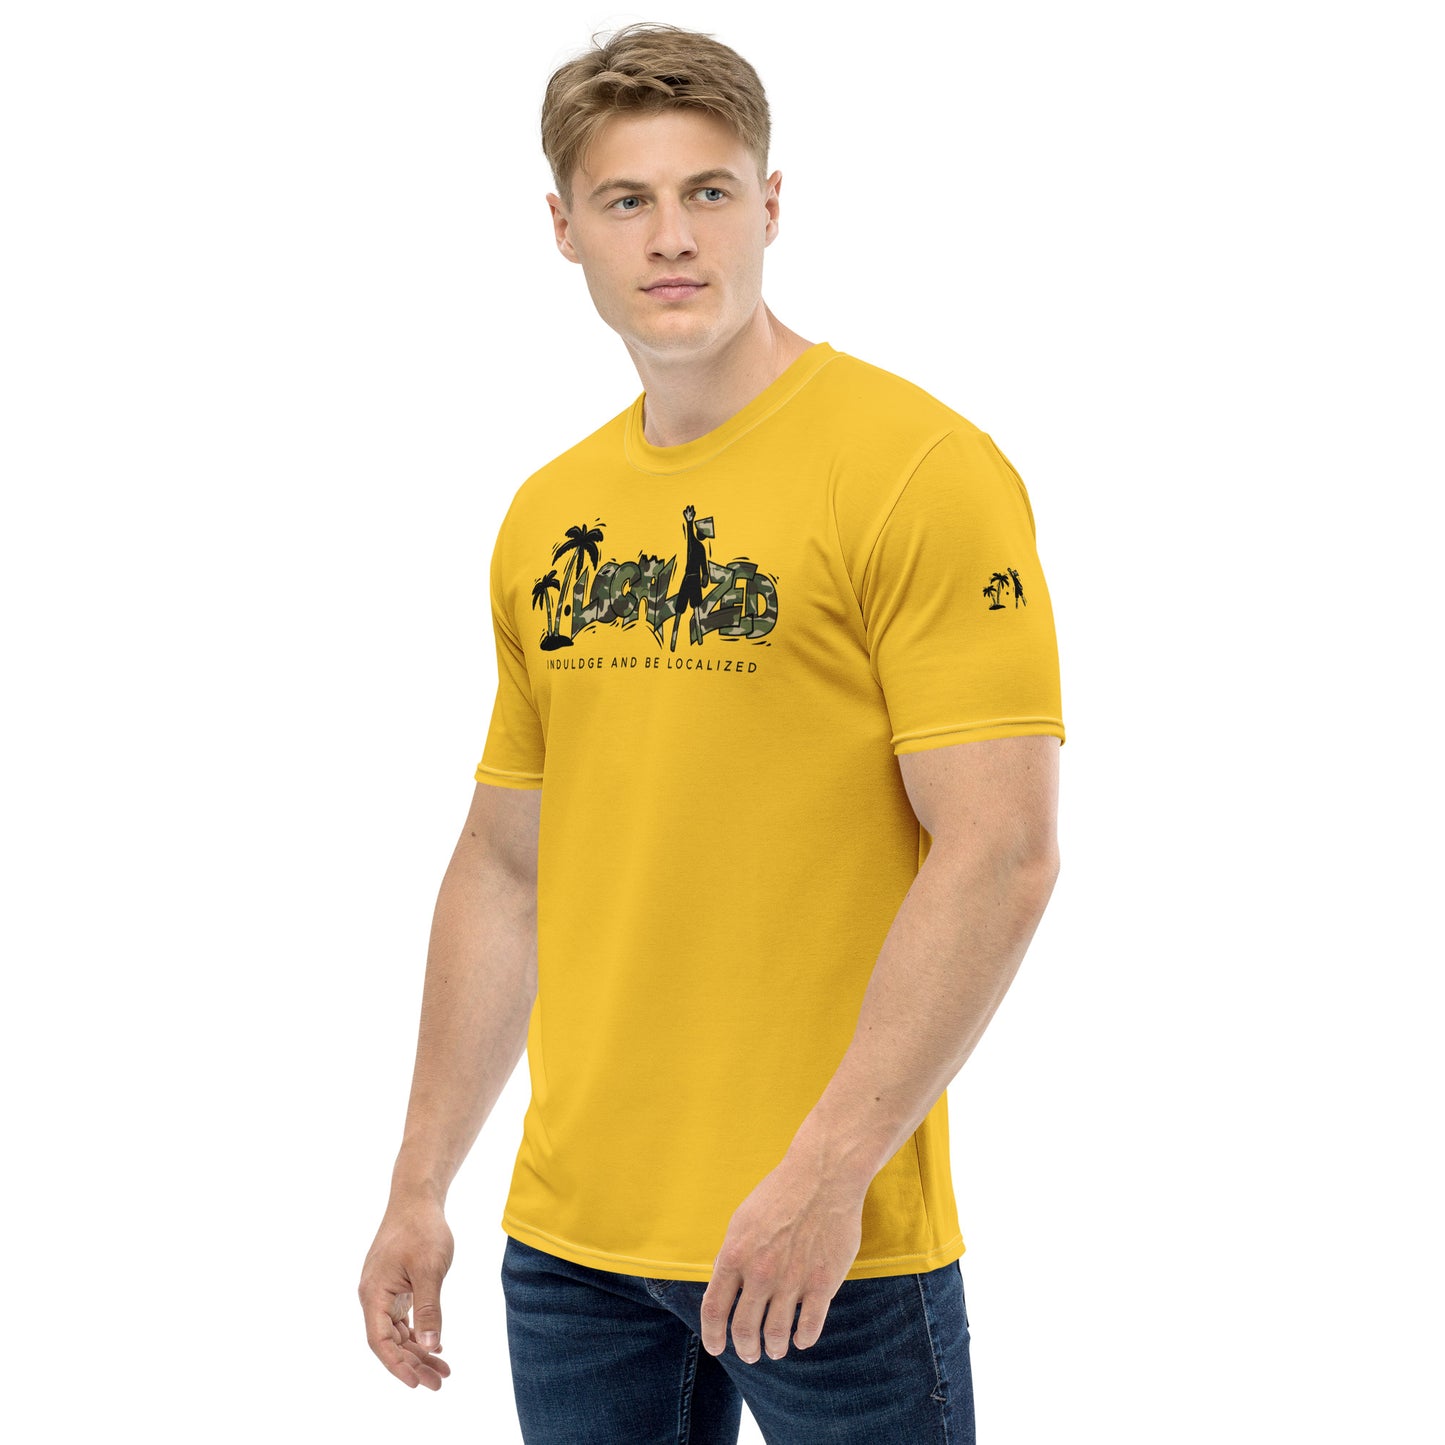 Gold V.Localized (Camo) Men’s Dry-Fit T-Shirt